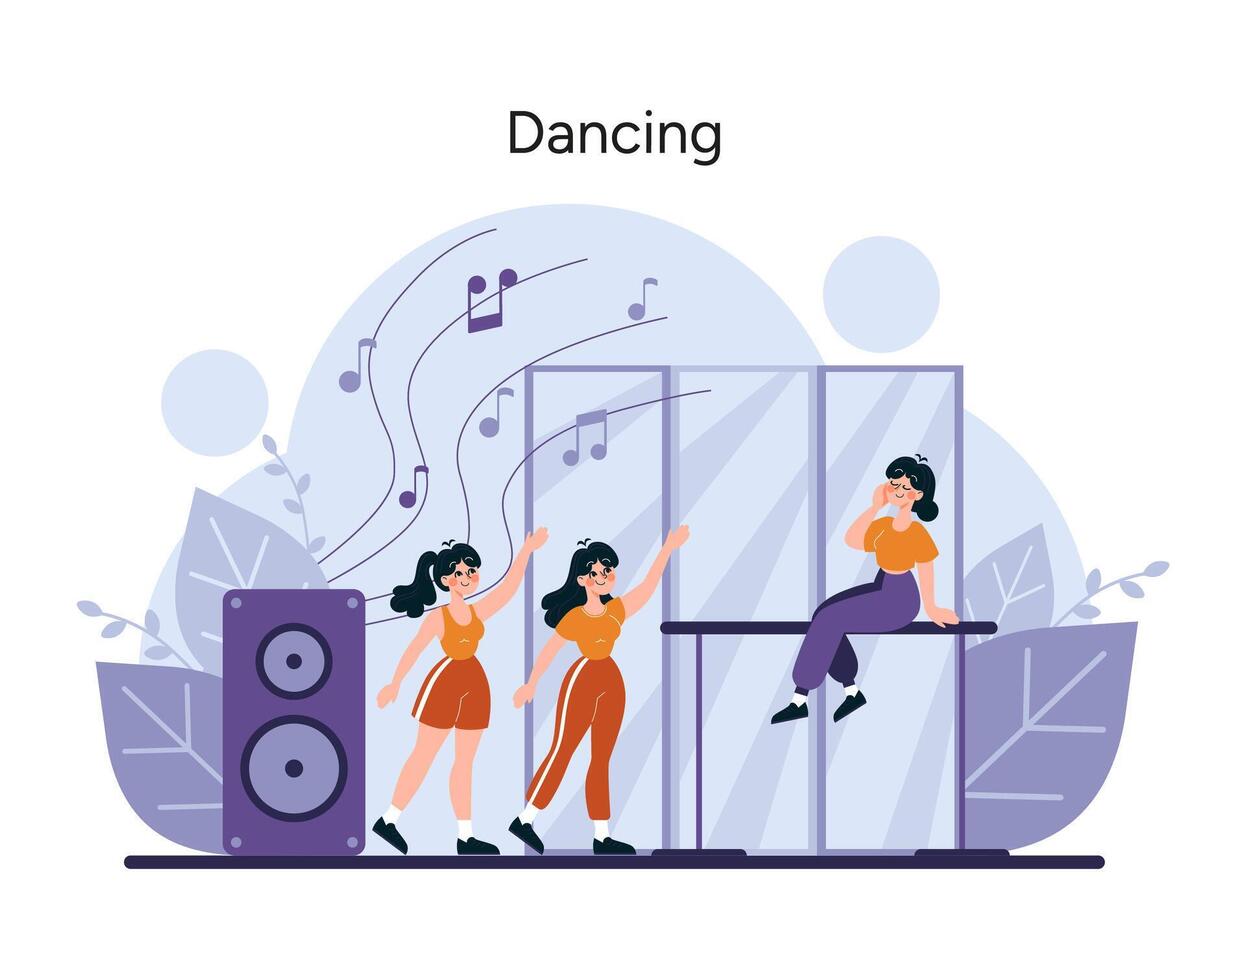 A lively scene of individuals moving rhythmically to music, exuding the joy and freedom of dance vector